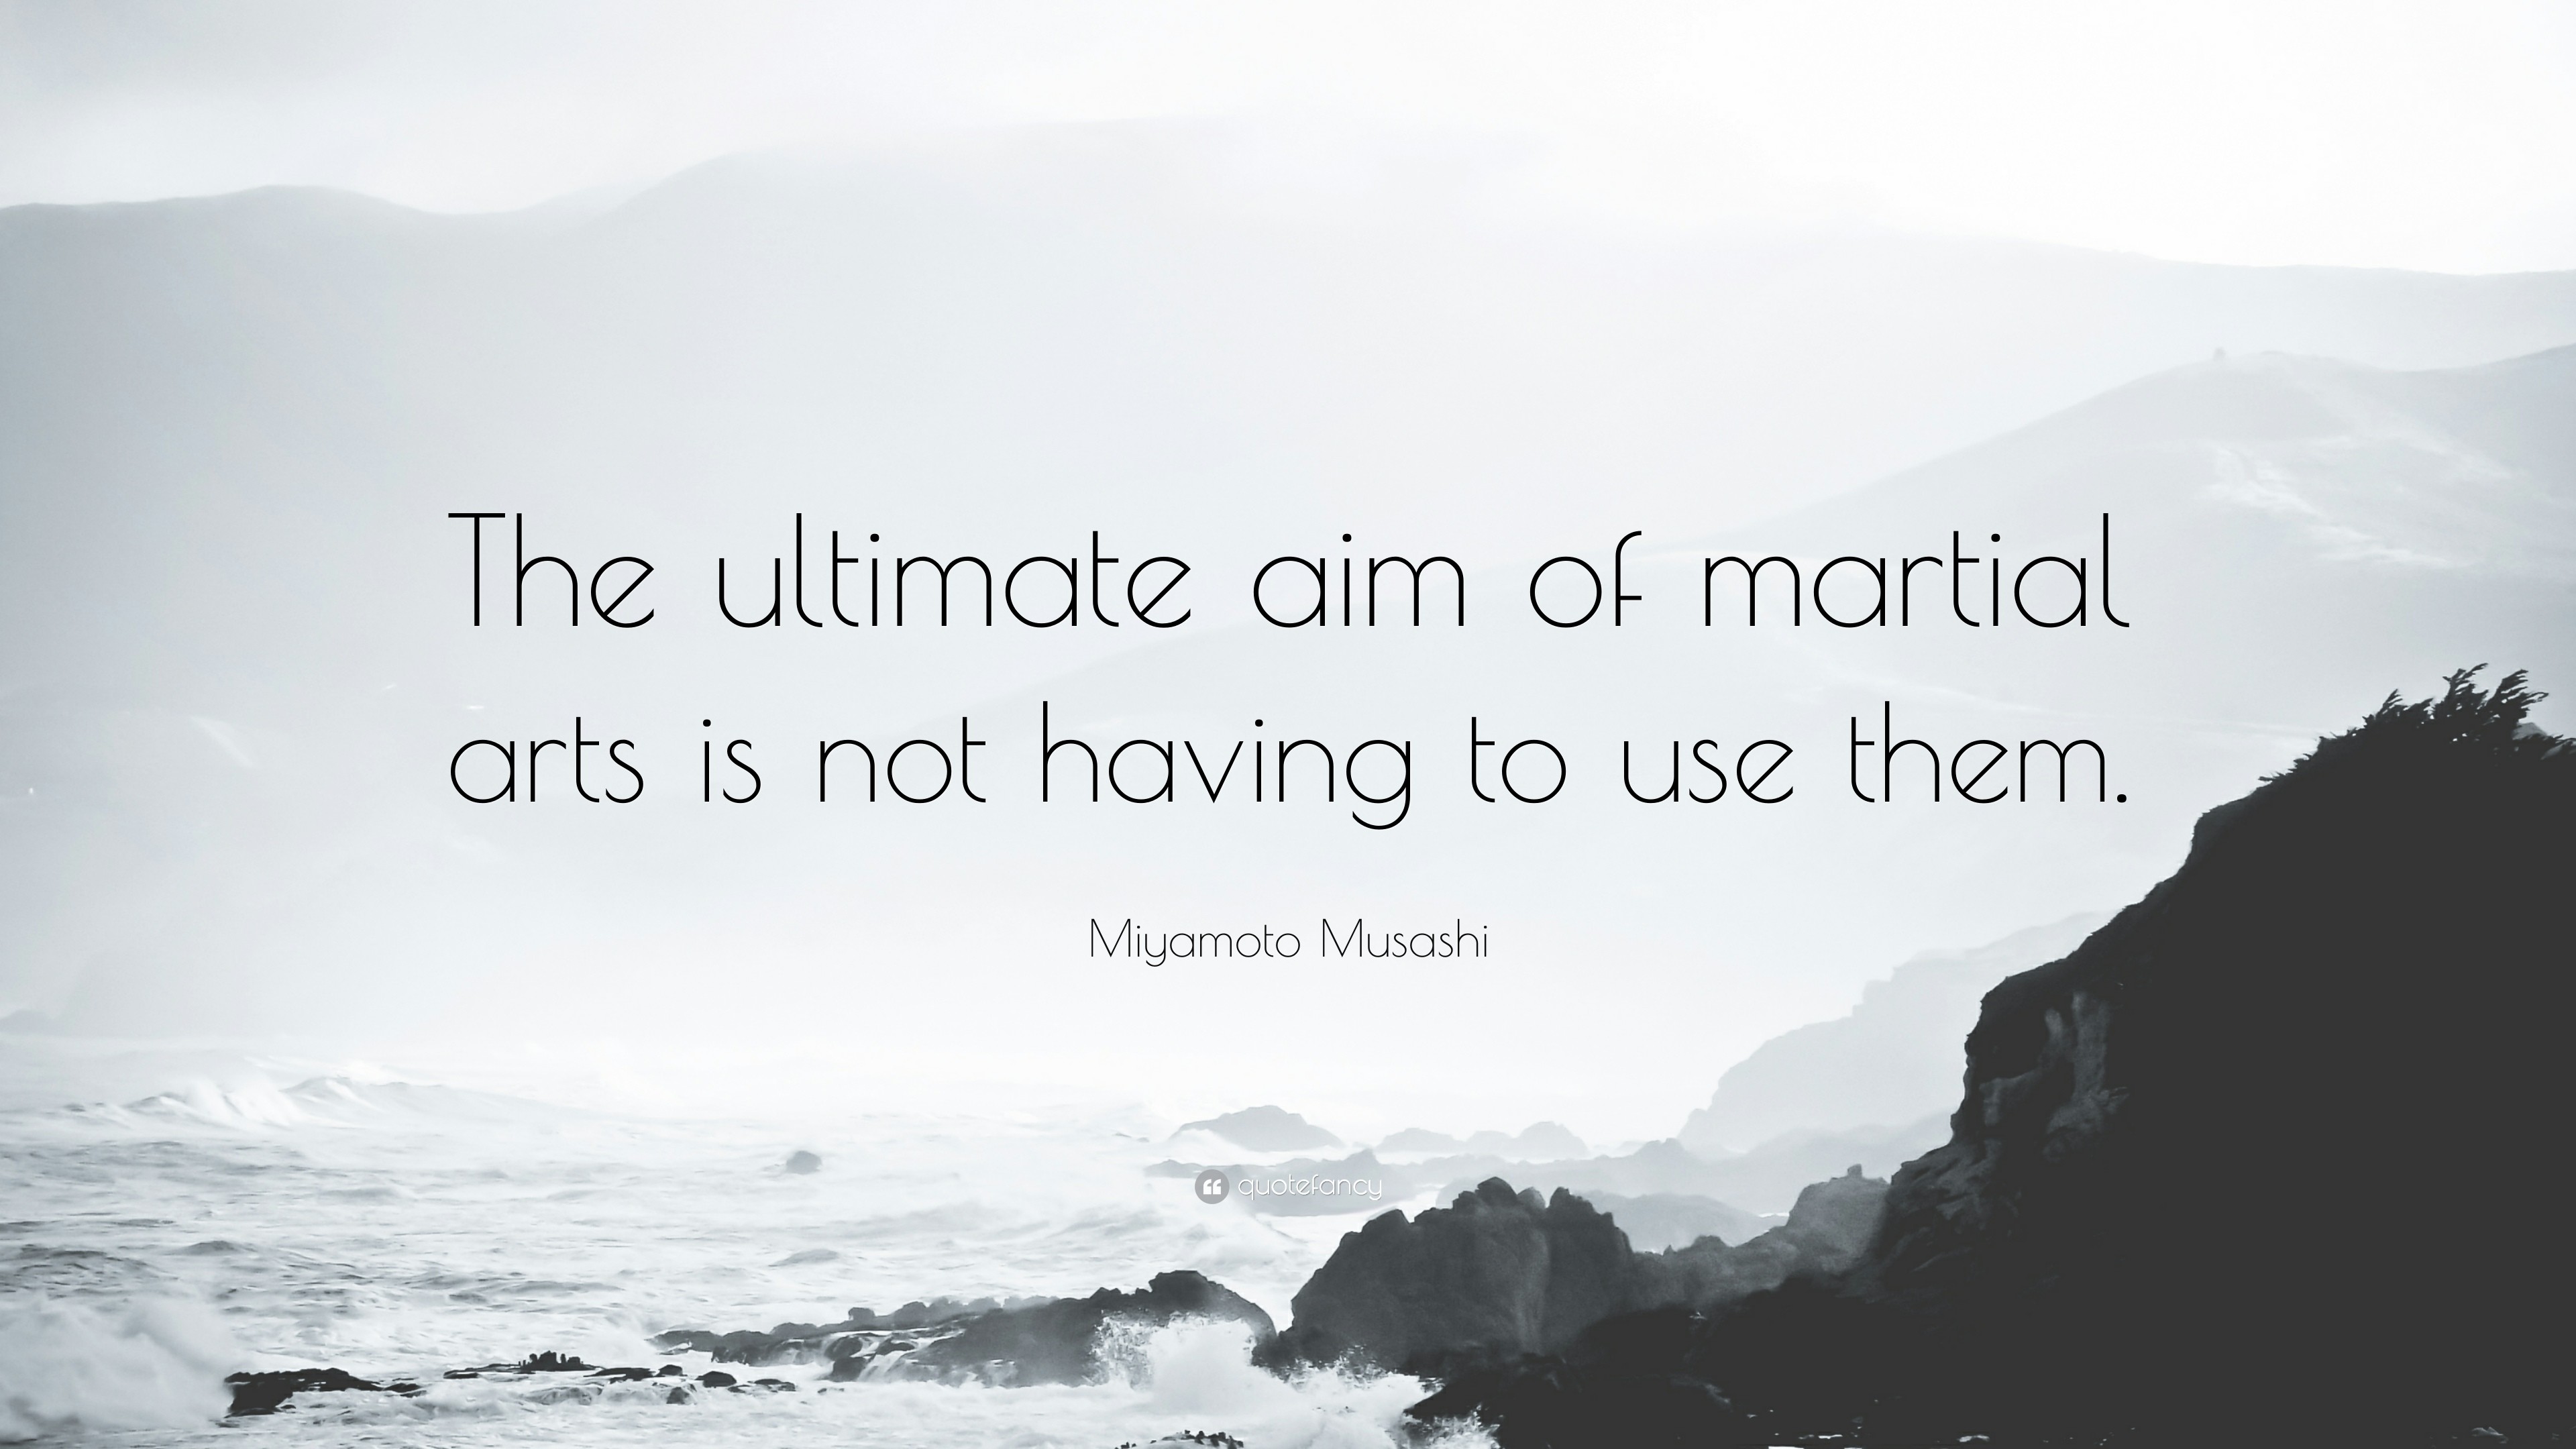 3840x2160 Miyamoto Musashi Quote: “The ultimate aim of martial arts is not having to  use